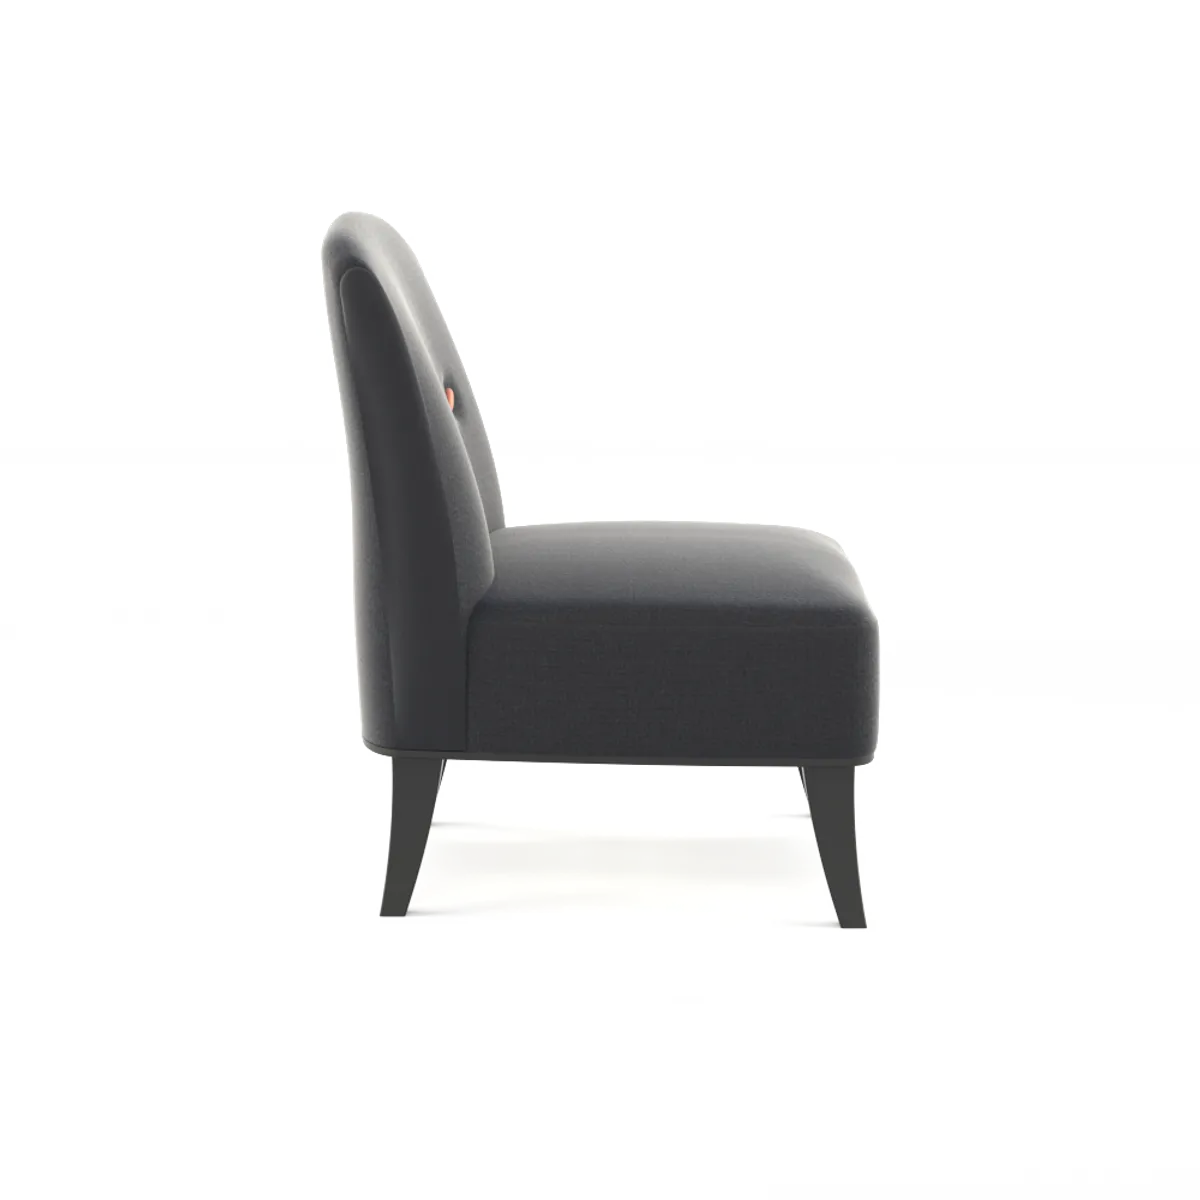 Curzon Chair Bespoke Exclusively By Inside Out Contracts 027